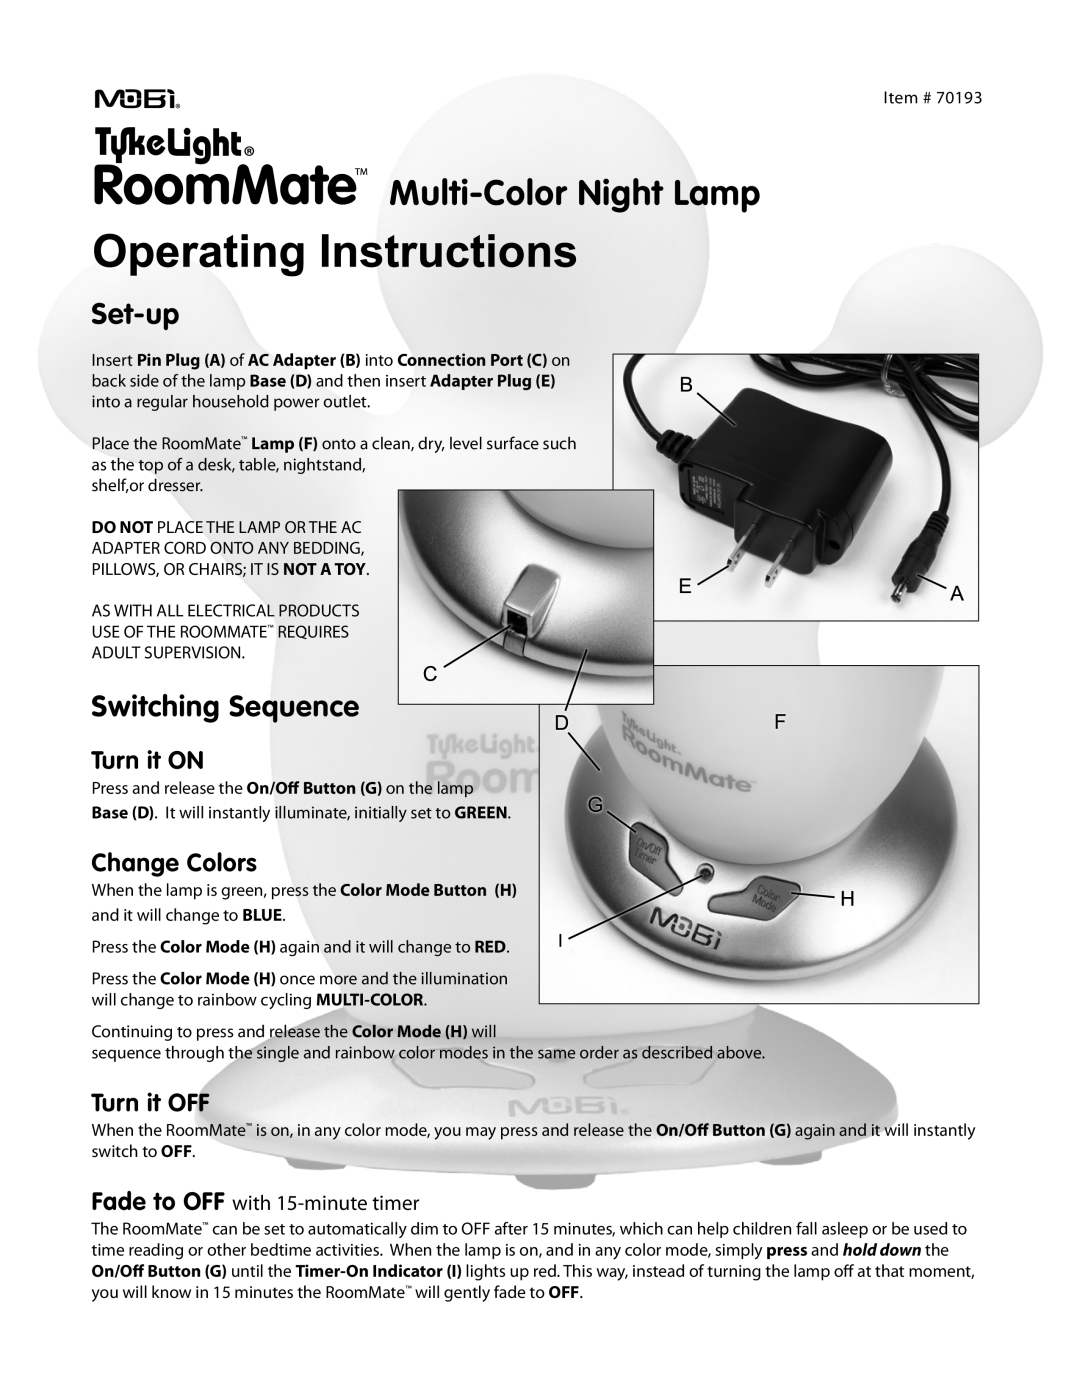 Mobi Technologies 70193 manual Set-up, Switching Sequence, Multi-ColorNight Lamp, Turn it ON, Change Colors, Turn it OFF 